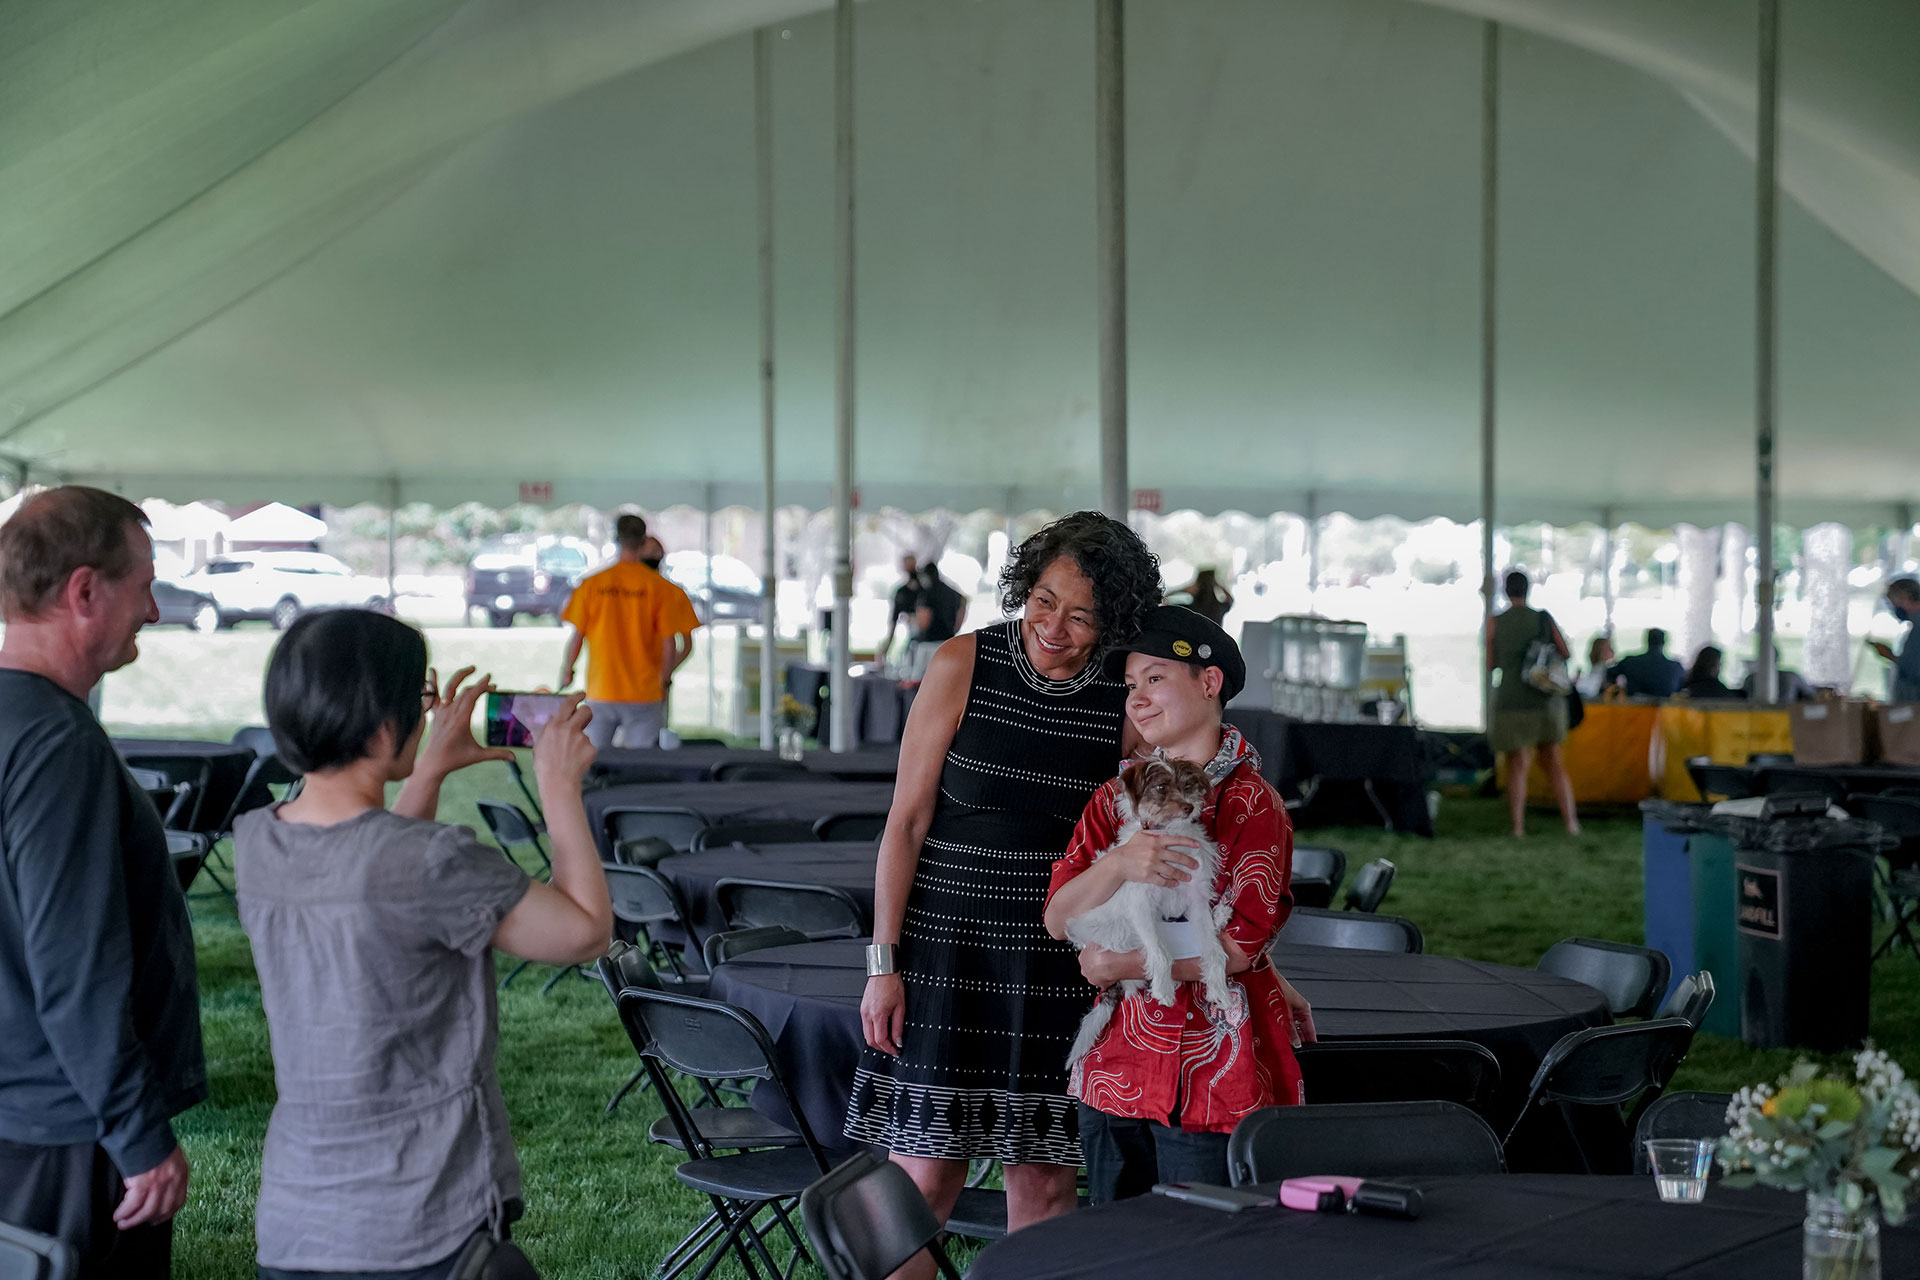 Colorado College President L. Song Richardson meets new students and families during 2021 New Student Orientation move-in. Photo by Gray Warrior